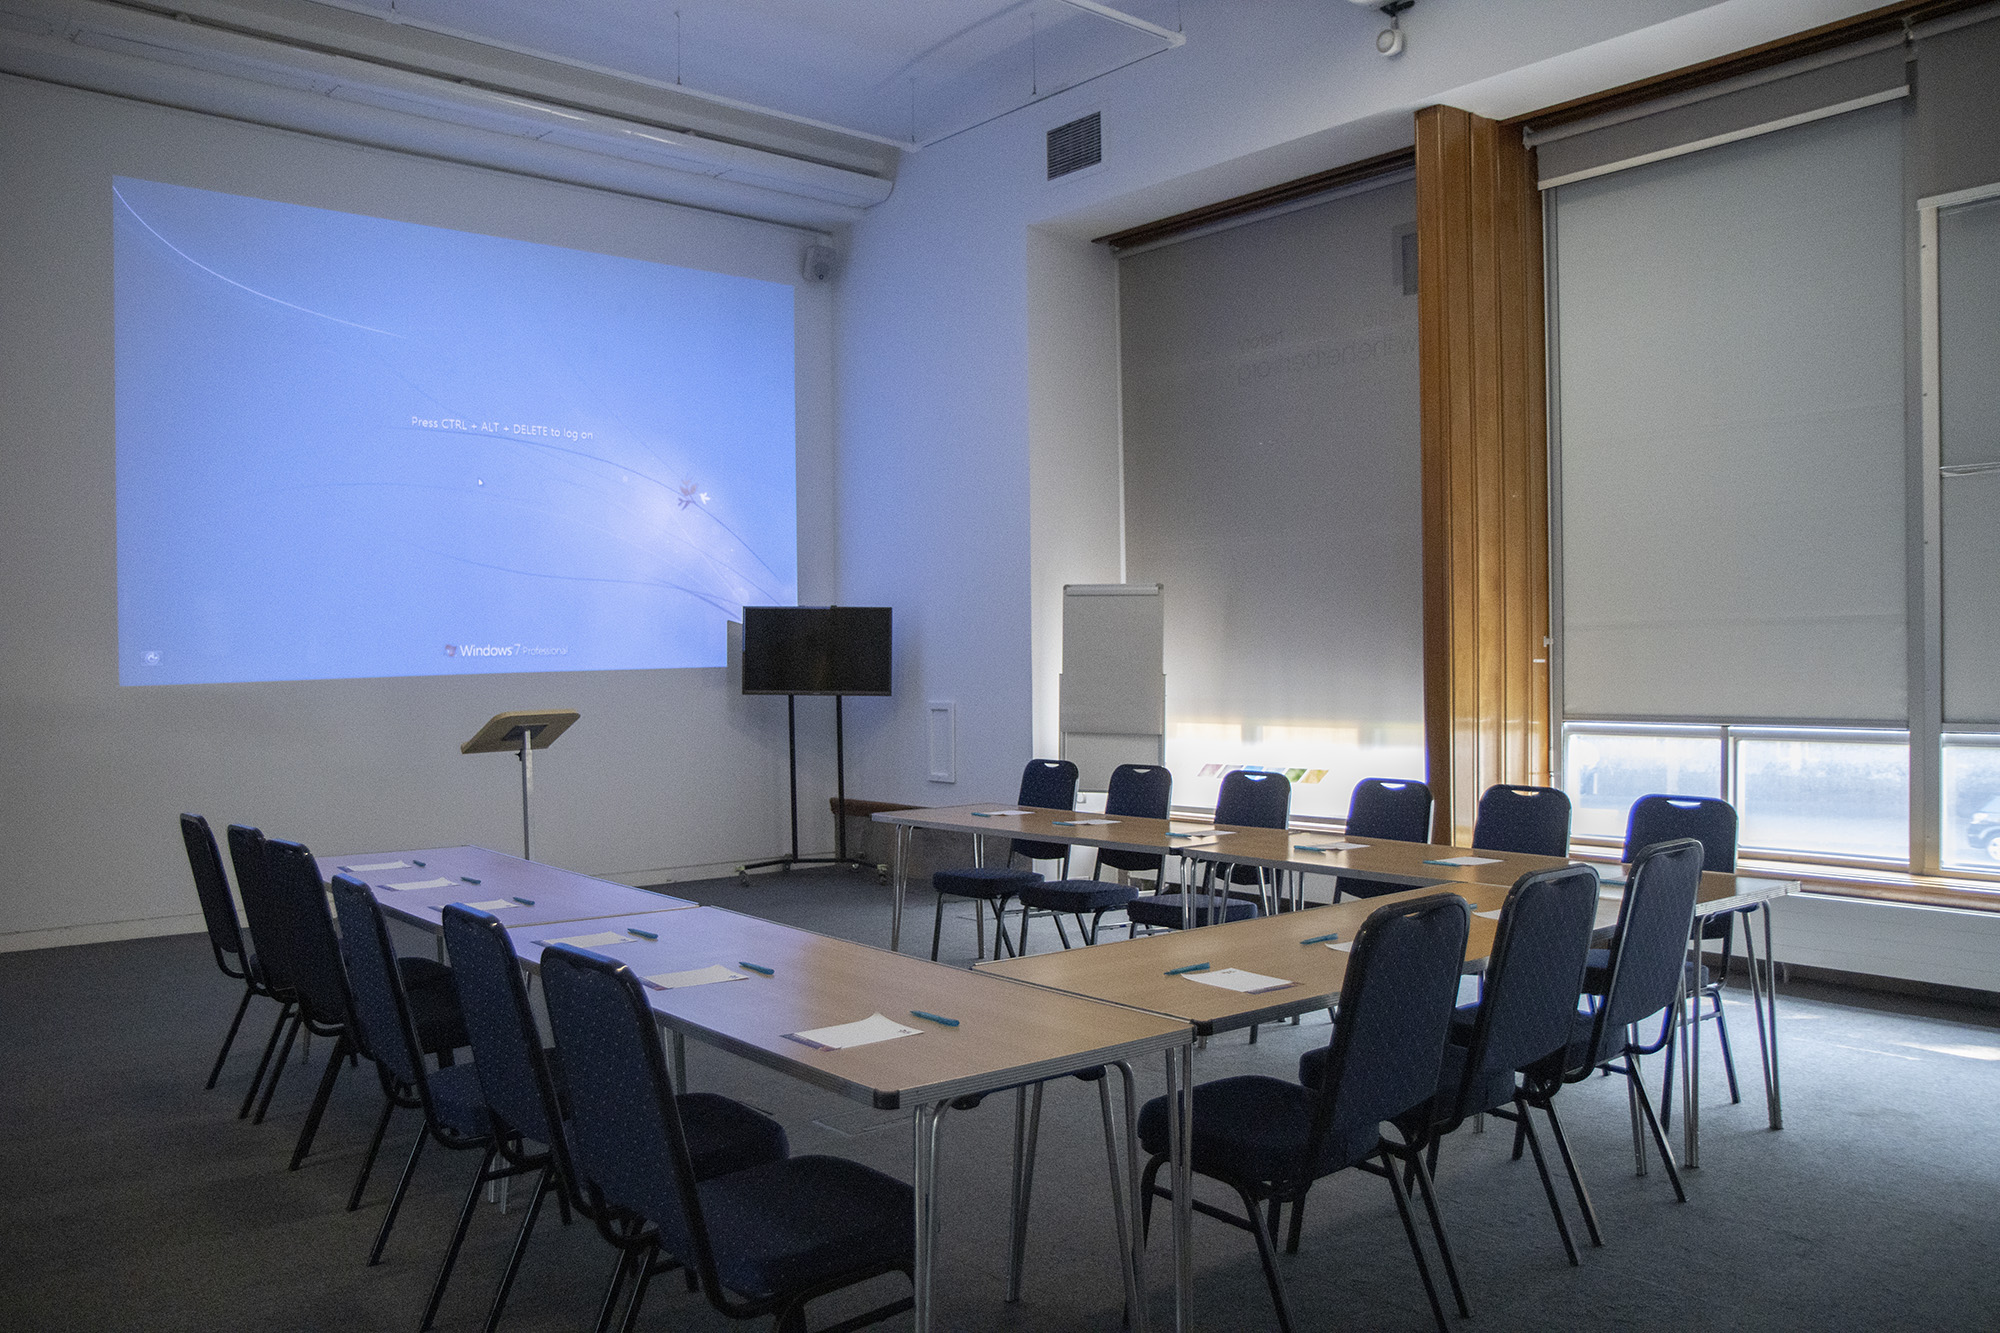 A photograph of Learning Space 2 set up for a meeting with 15 seats, a lectern and a projector